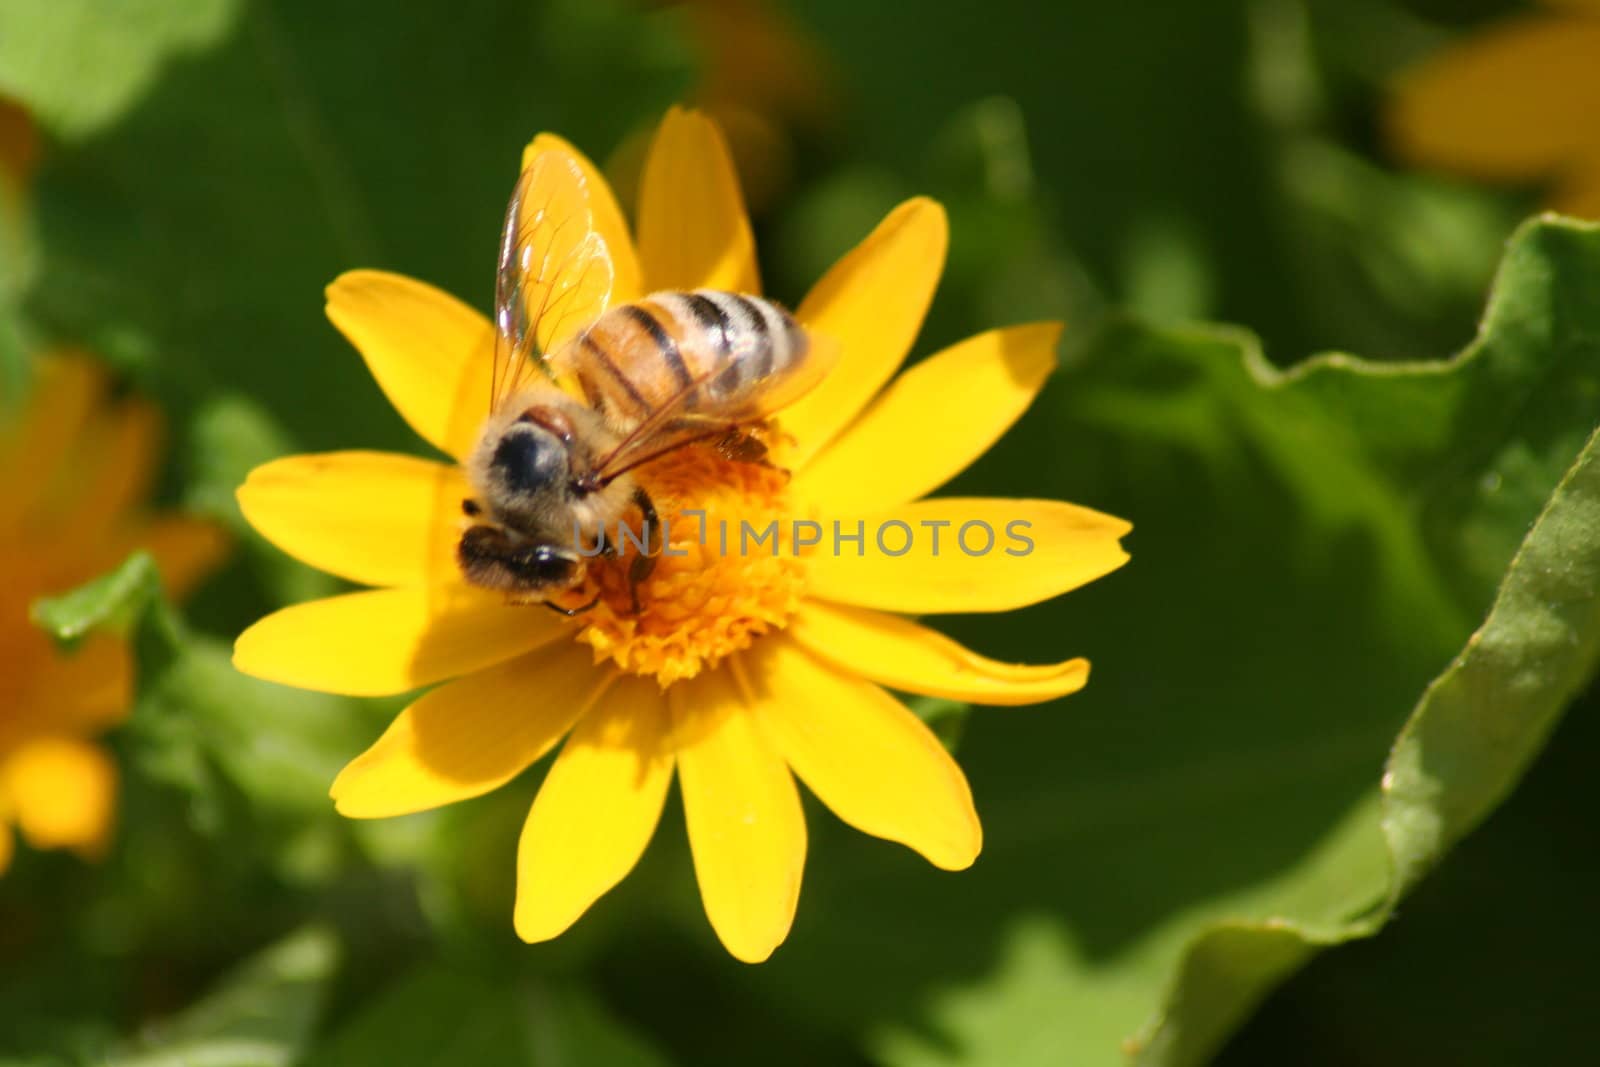 Yellow and black striped bee on yellow flower with greenery background